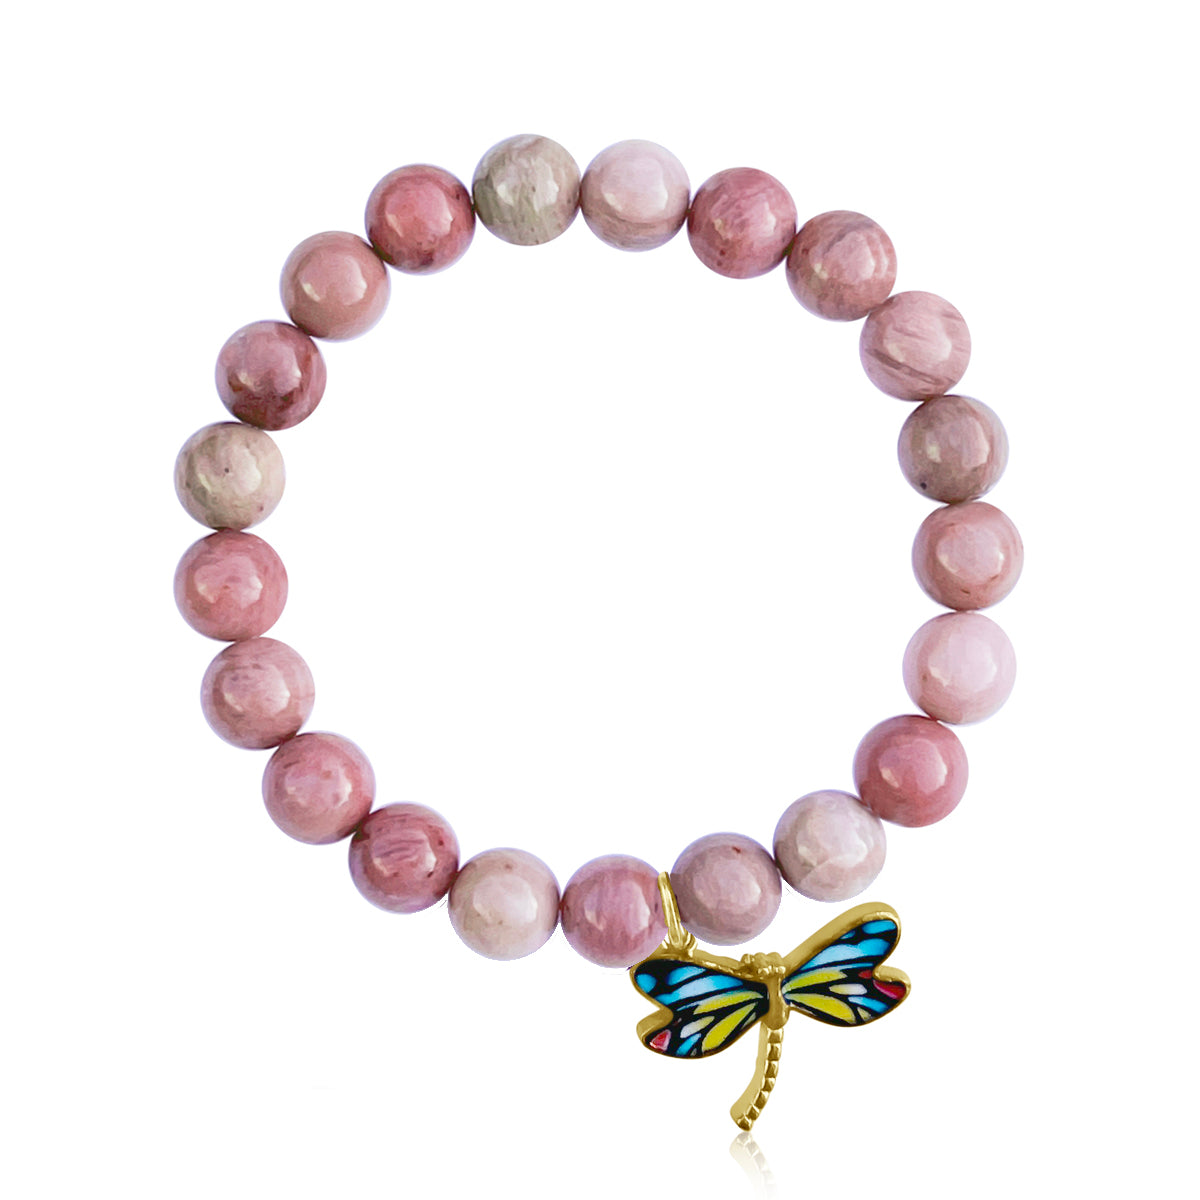 Immerse yourself in the journey of heartful transformation with the Dragonfly Whispers - Rhodonite Bracelet, your companion in embracing life's ebbs and flows with love and grace.